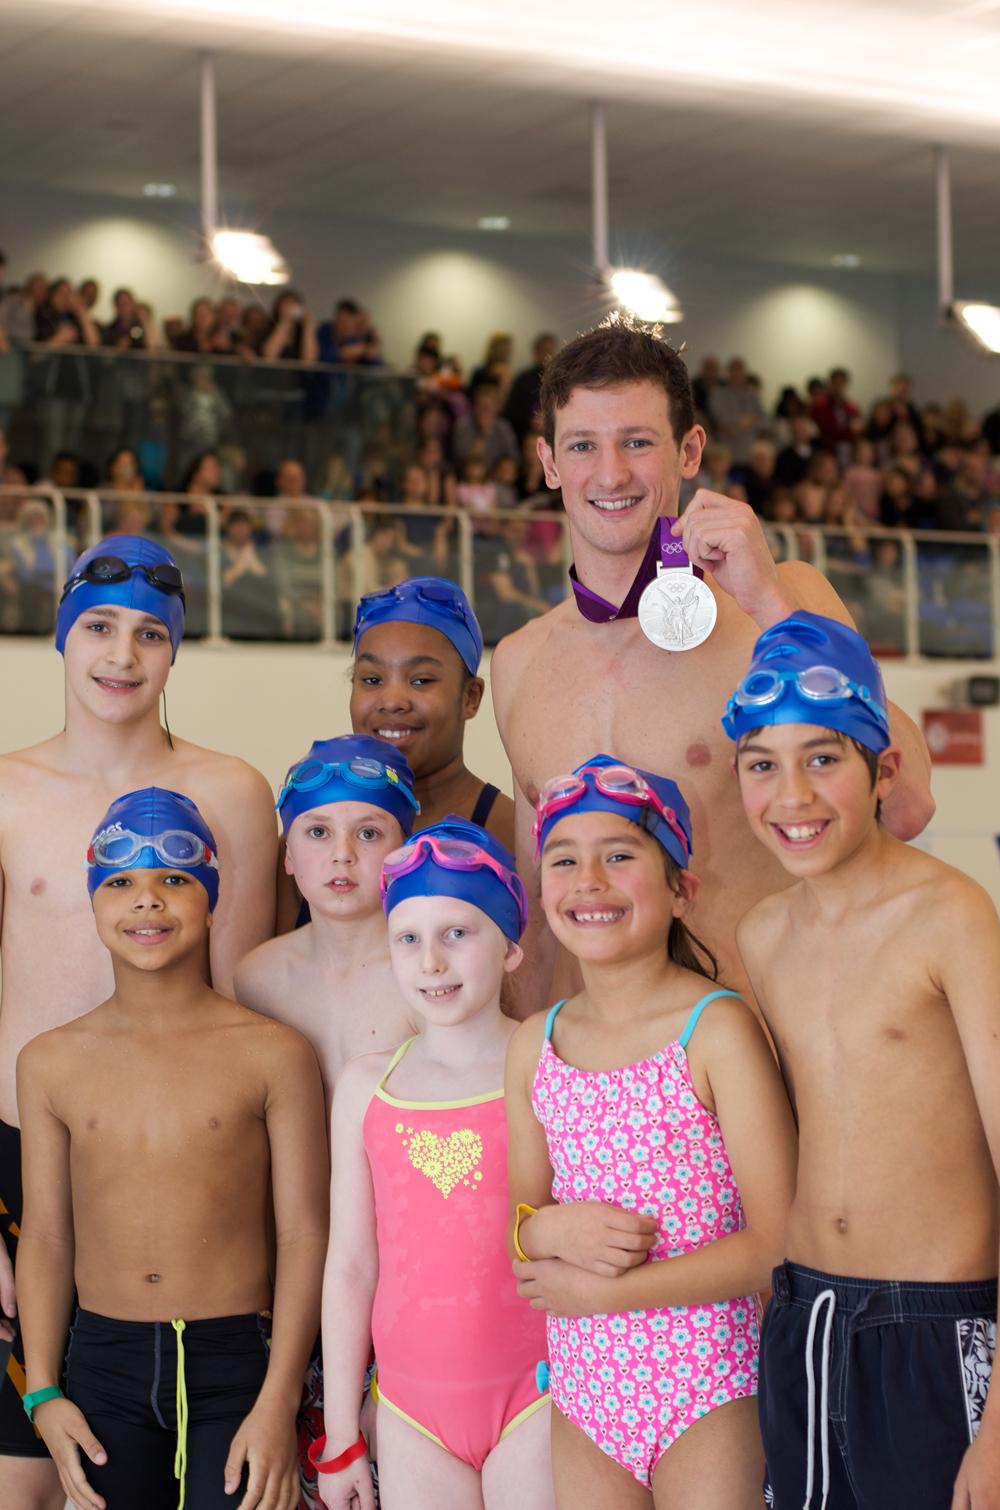 London 2012 breaststroke silver medallist Michael Jamieson visiting Westcroft Leisure Centre in Surrey, operated by Everyone Active